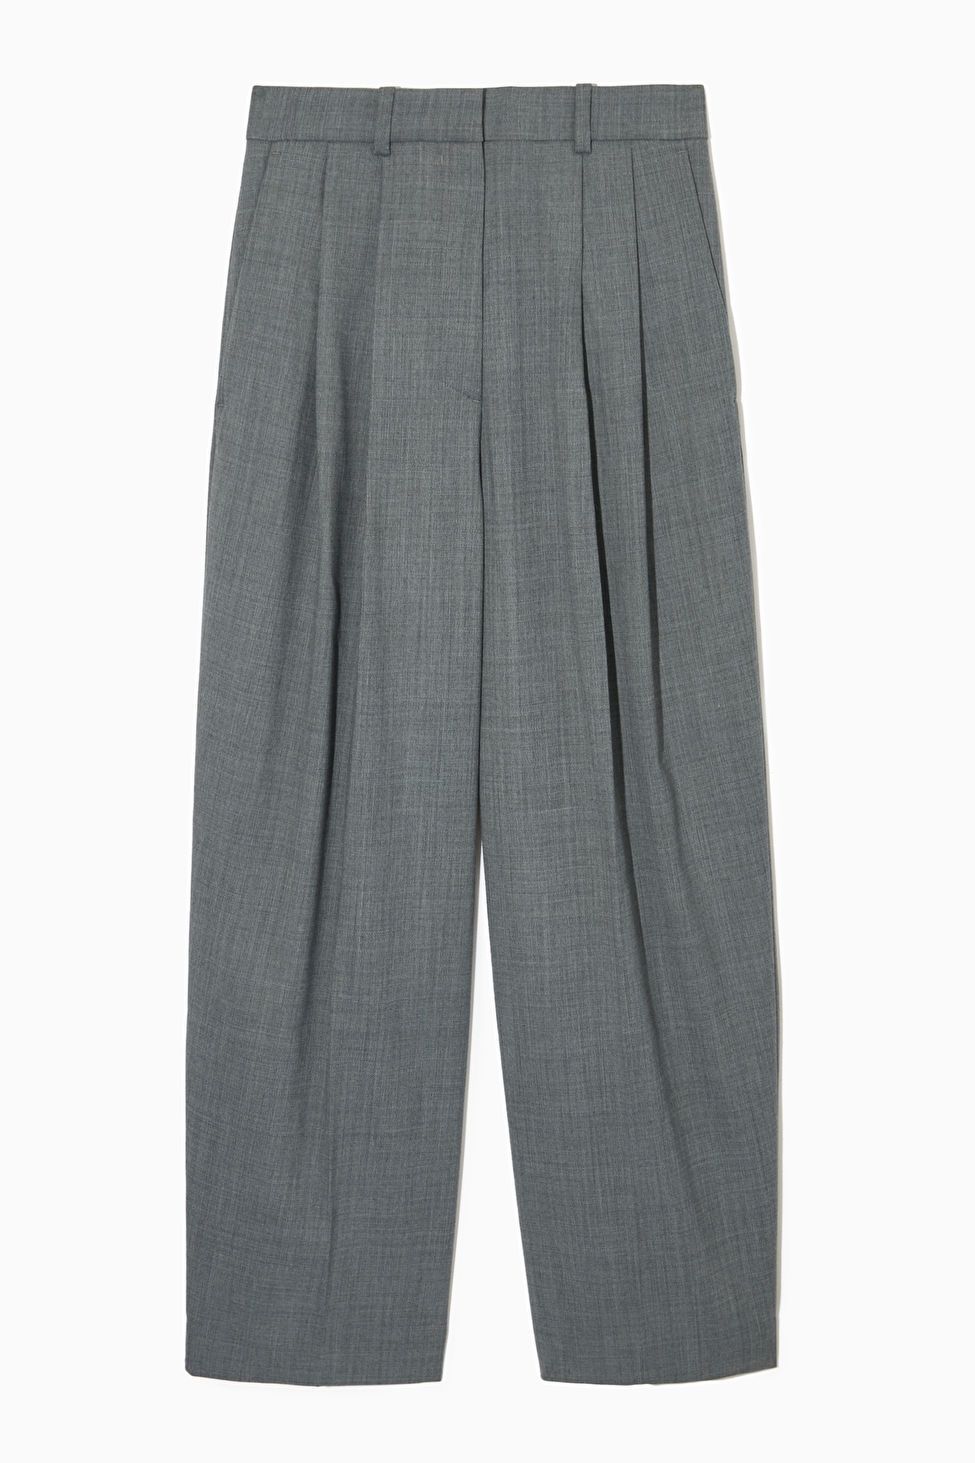 WIDE-LEG TAILORED WOOL-BLEND TROUSERS | COS UK